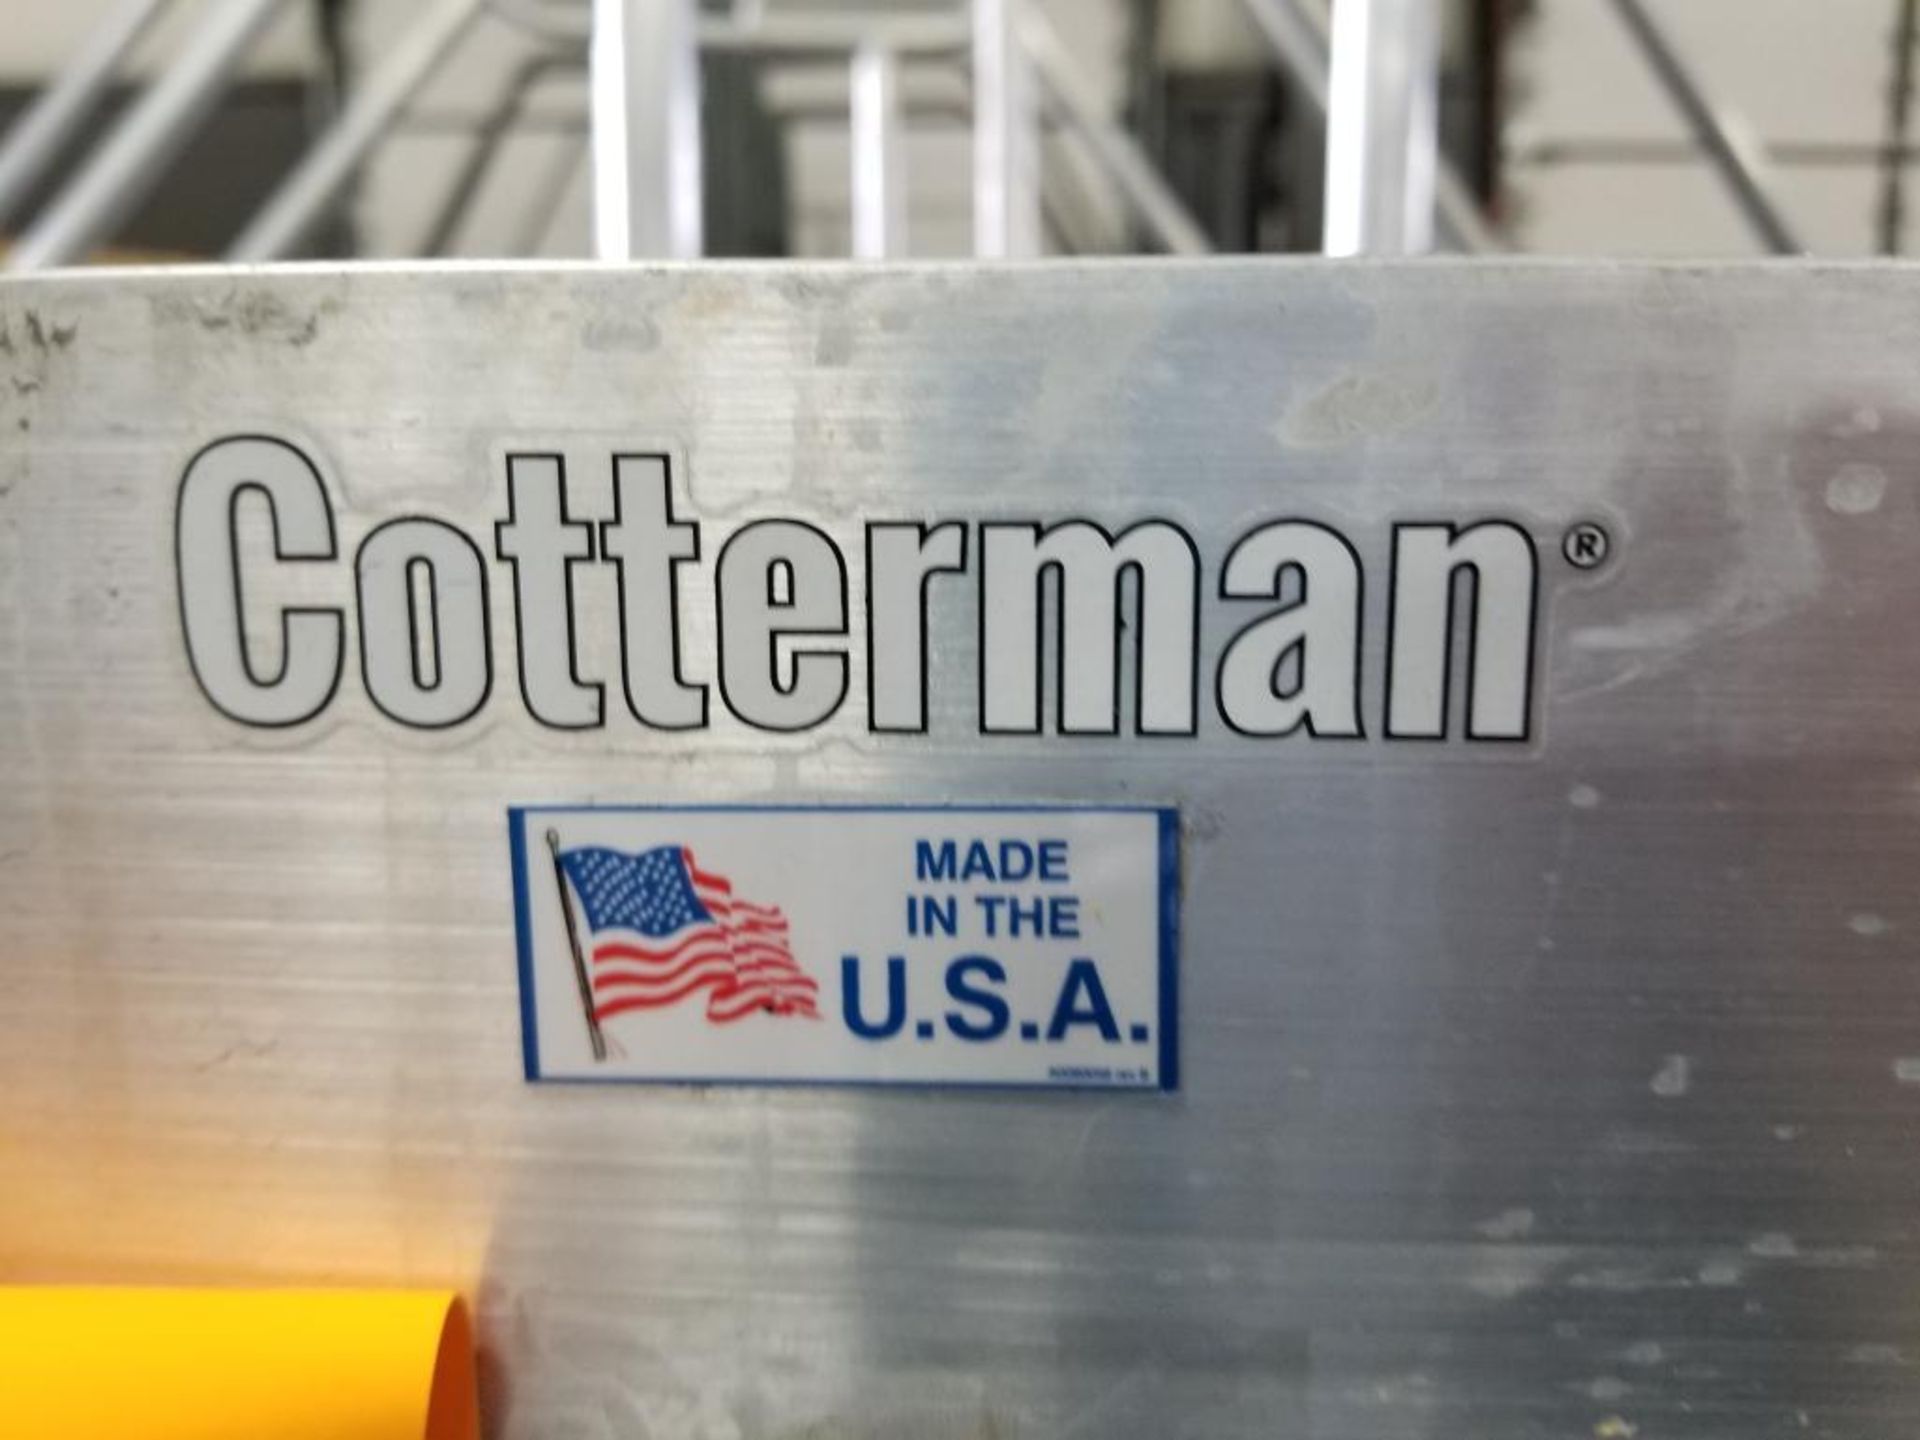 Cotterman aluminum crossover bridge step set. 120" long x 30" wide x 99" tall with rail. - Image 4 of 9